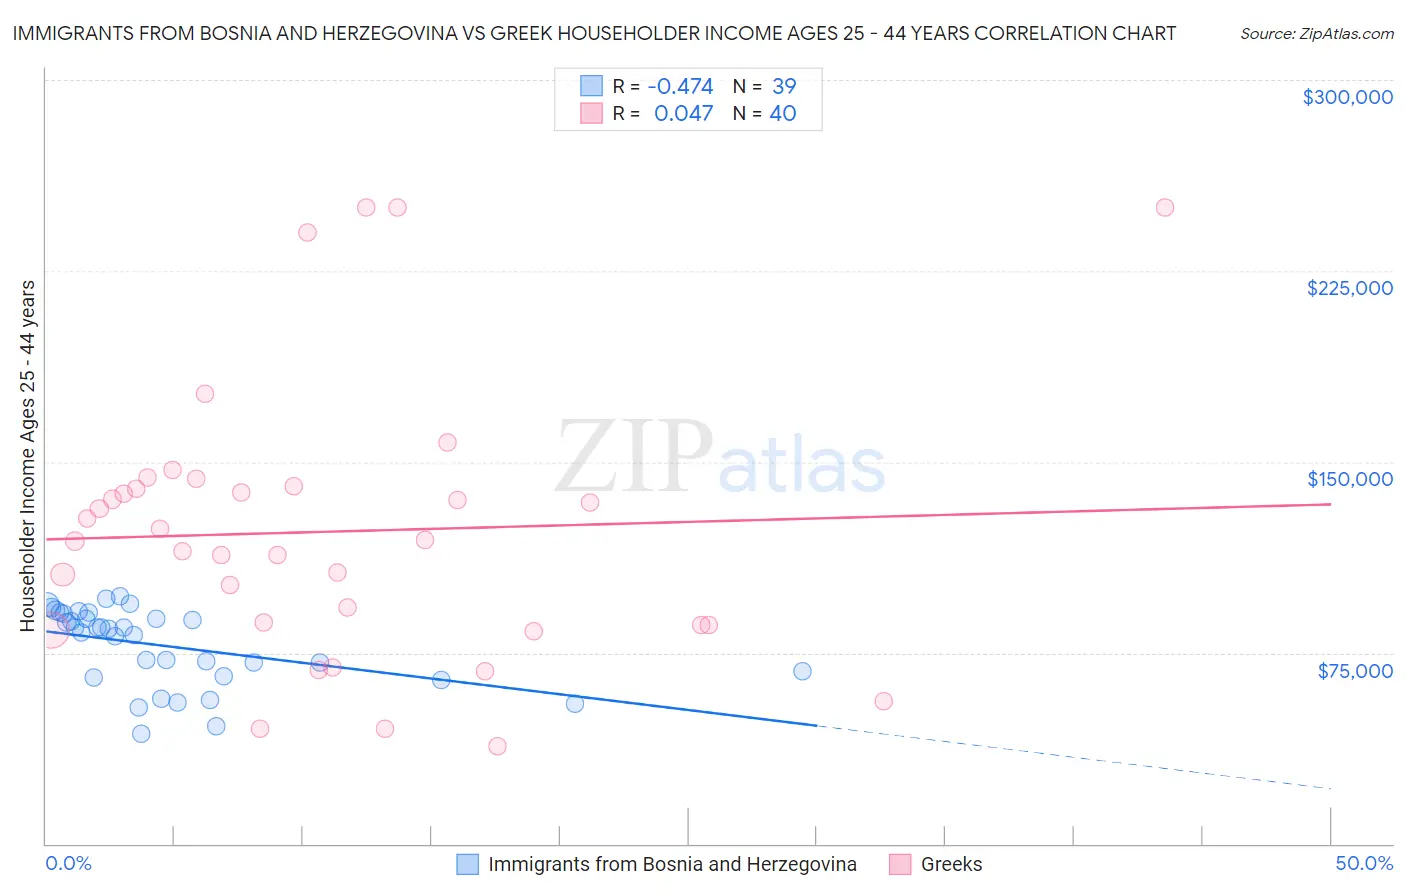 Immigrants from Bosnia and Herzegovina vs Greek Householder Income Ages 25 - 44 years